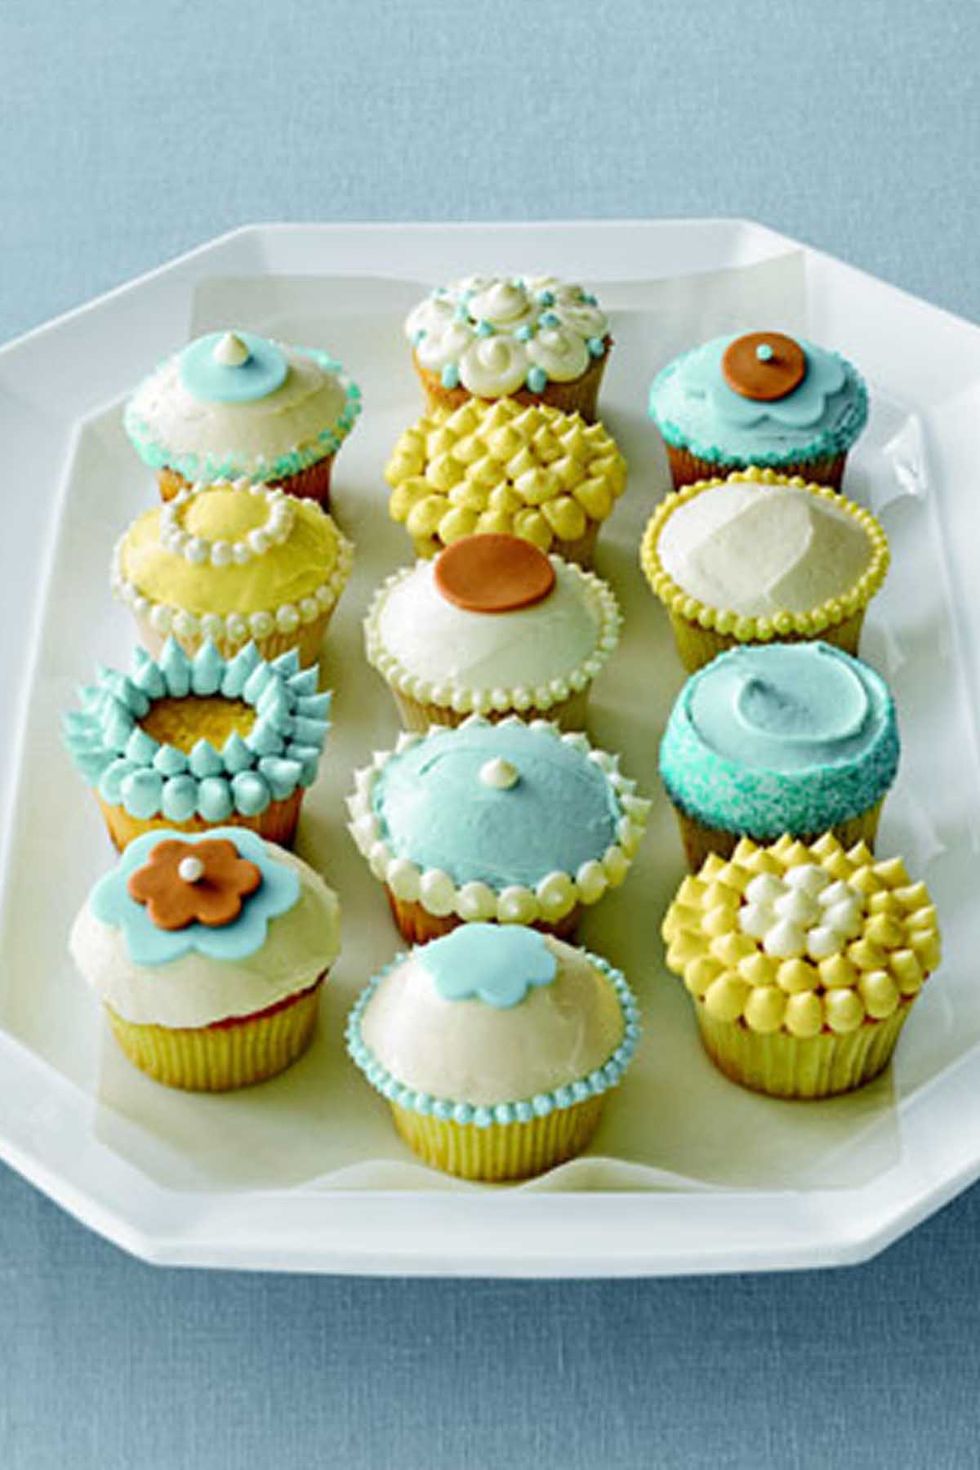 30 Best Cupcake Decorating Ideas - Easy Recipes for Homemade Cupcakes